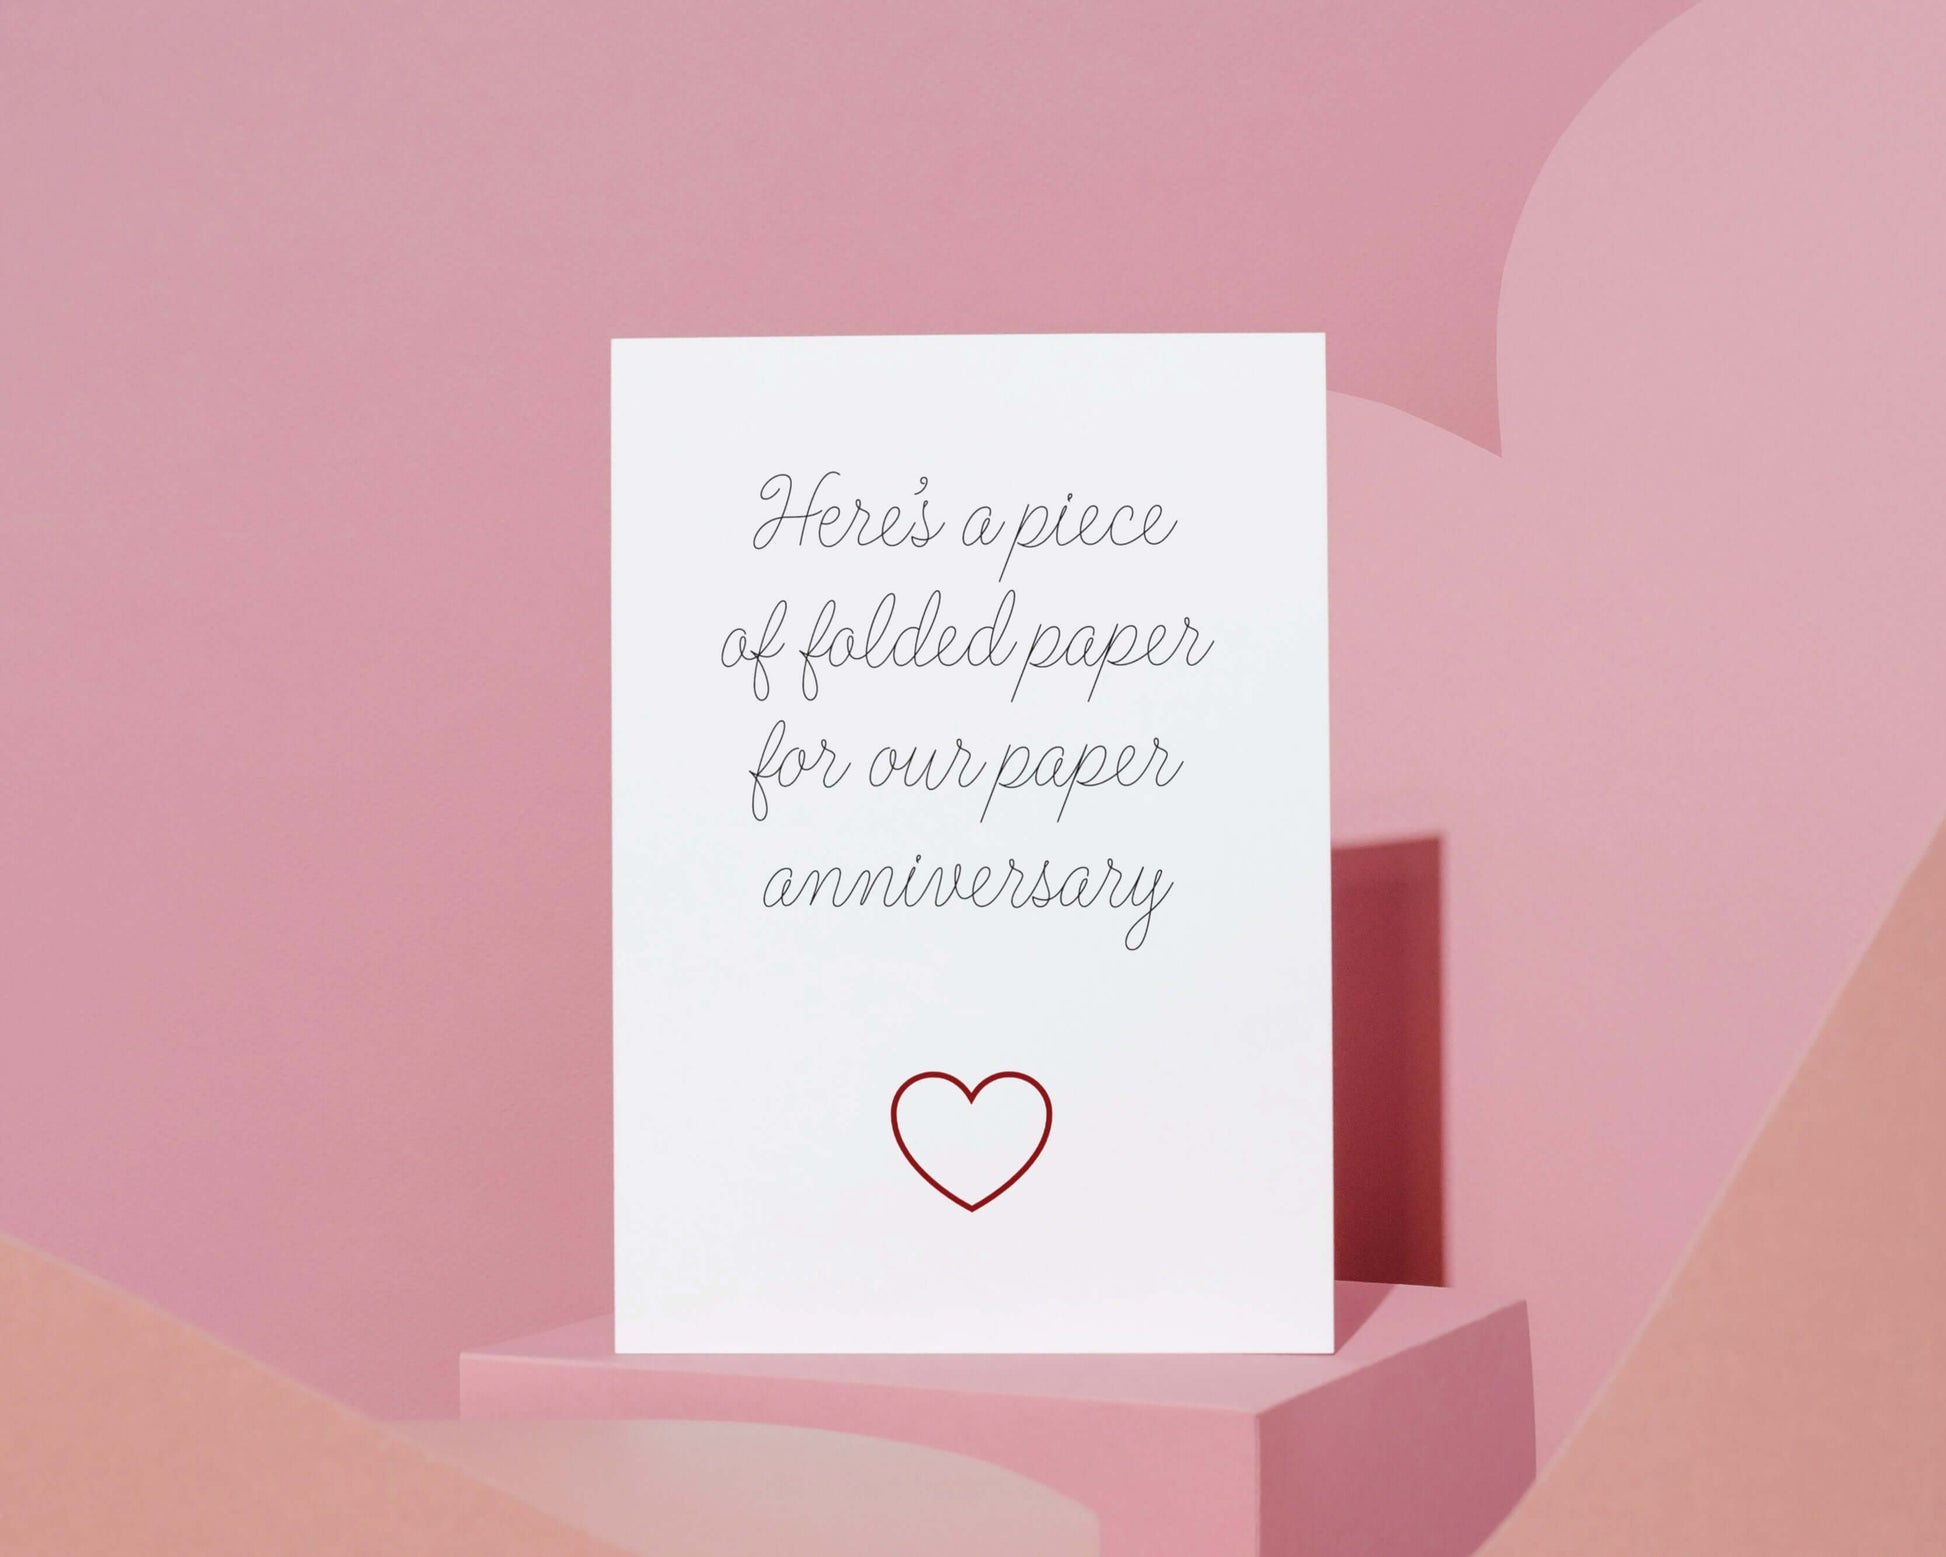 The Card Store UK's Here's a Piece of Folded Paper for Our Paper Anniversary | Funny 1st Anniversary Card | Funny Rude Wedding Relationship Anniversary Greeting Card, Anniversary Cards for £3.50 each